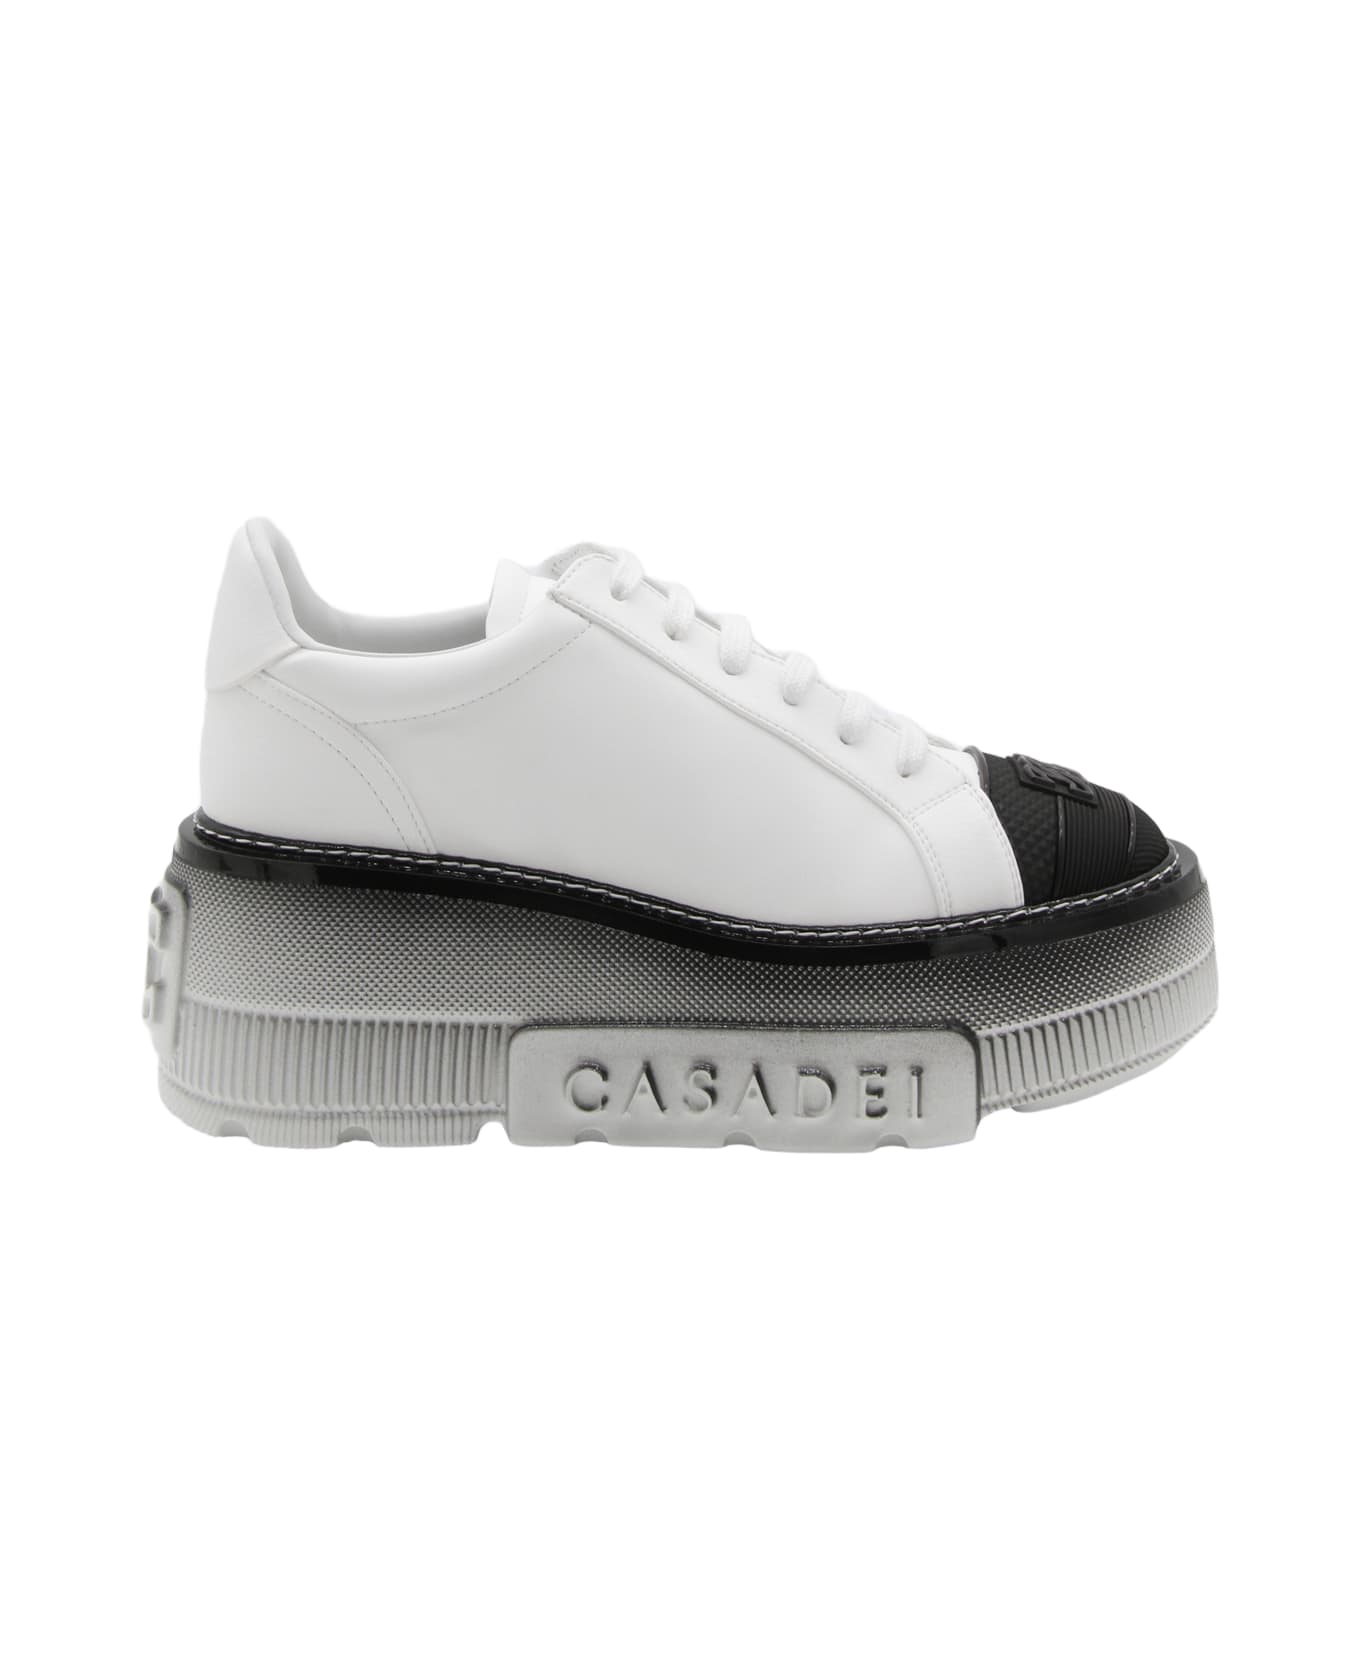 Casadei White And Black Leather Sneakers - White ウェッジシューズ